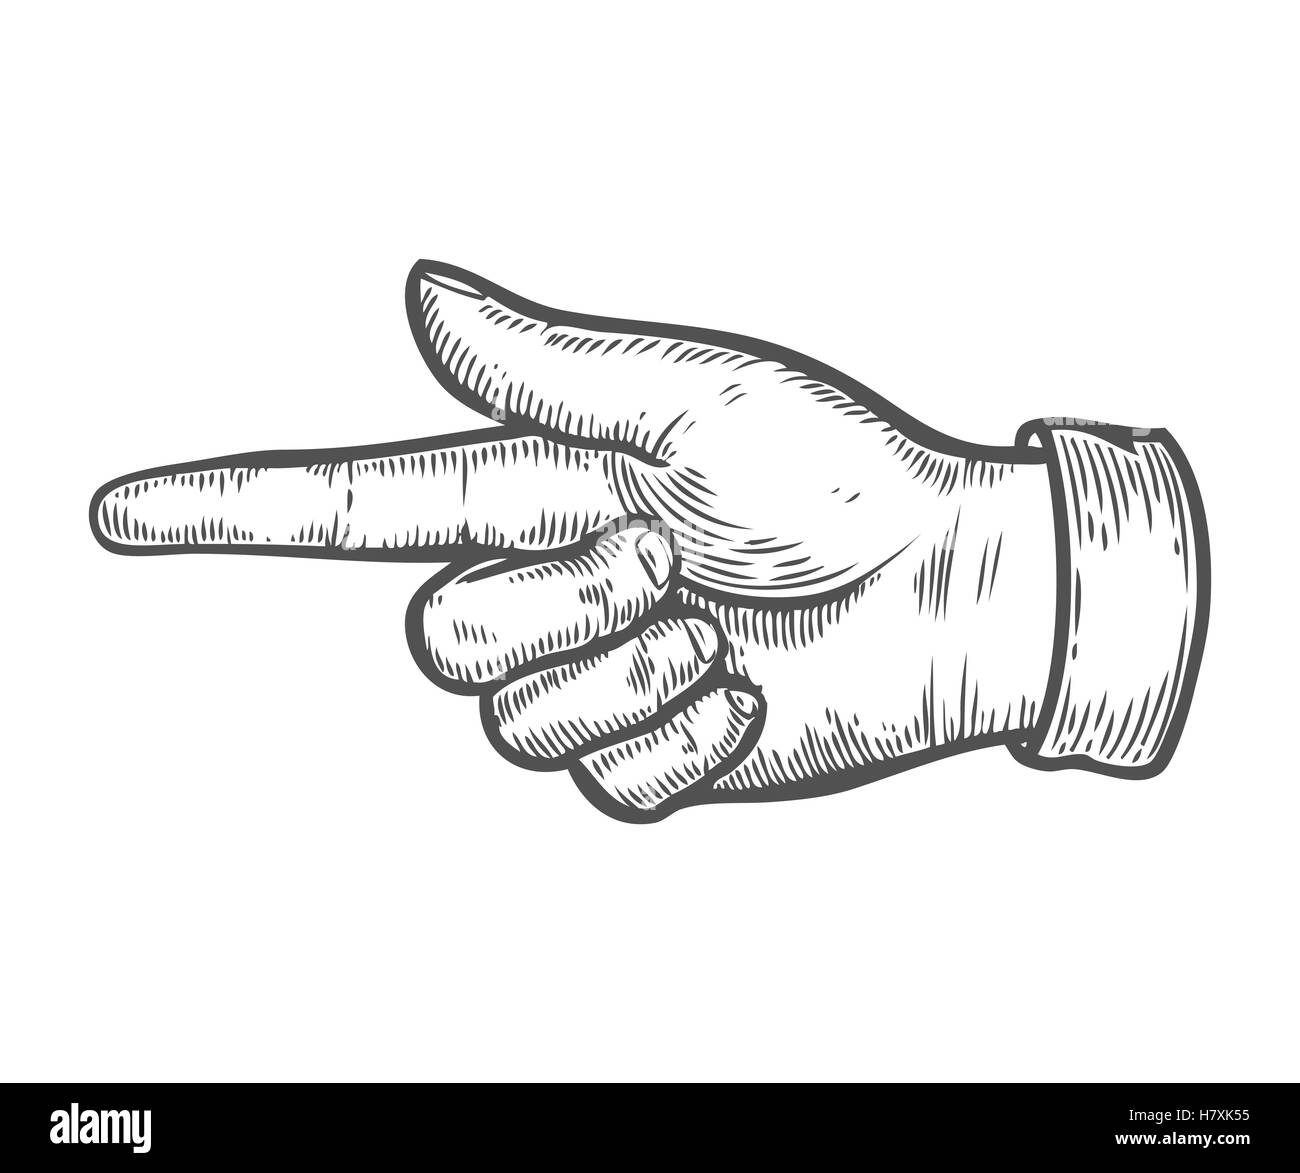 Pointing Finger Stock Illustrations, Royalty-Free Vector Graphics & Clip  Art - iStock | Hand pointing, Finger pointing blame, Pointing finger vector